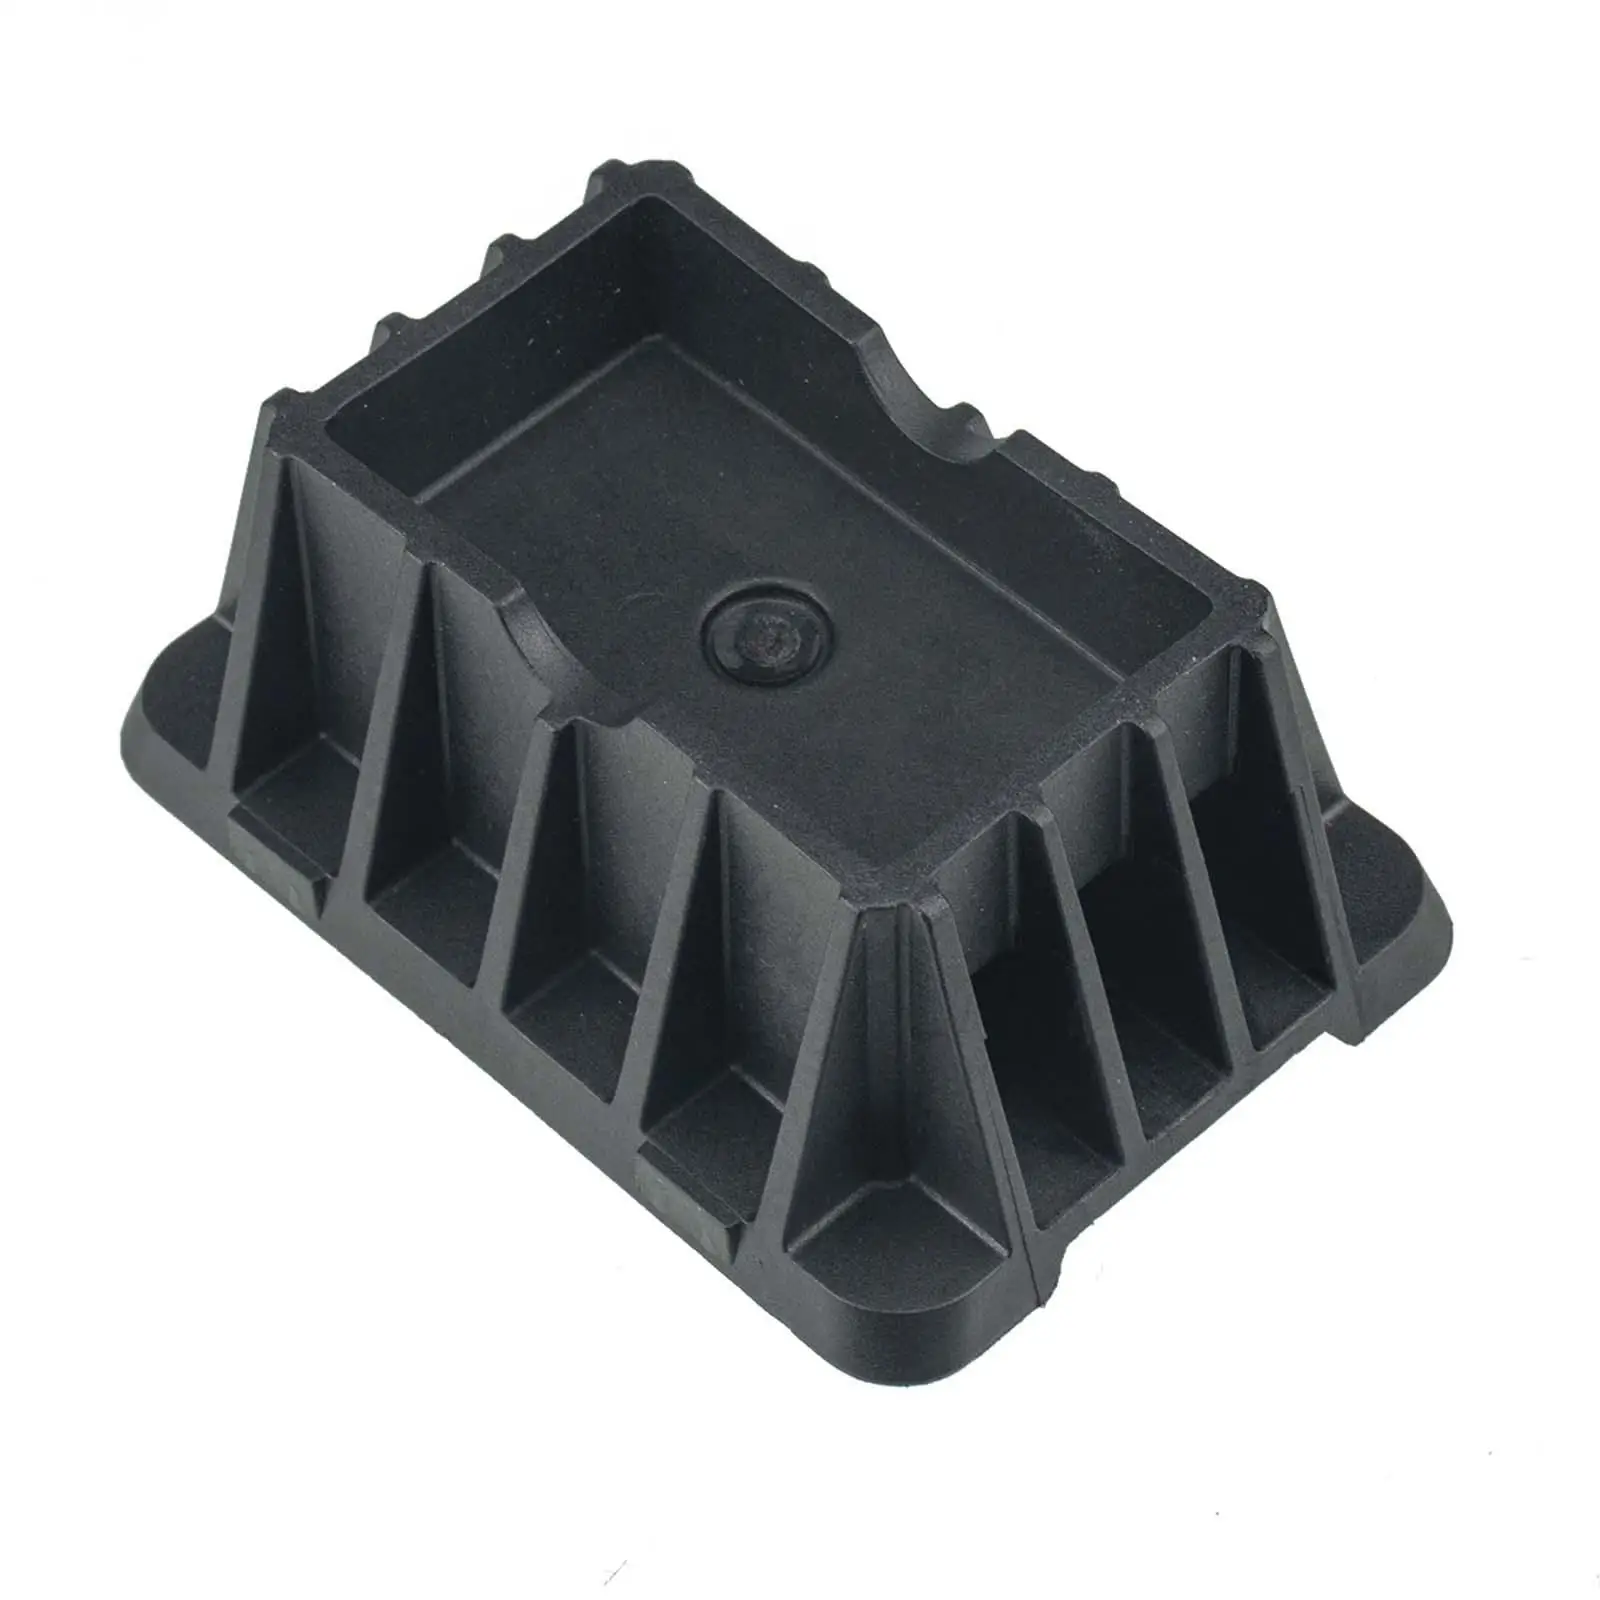 Automotive Jack Lift Pad High performance Rubber Jacking Adapter Puck Support for BMW 328i 2007-2013 Accessories